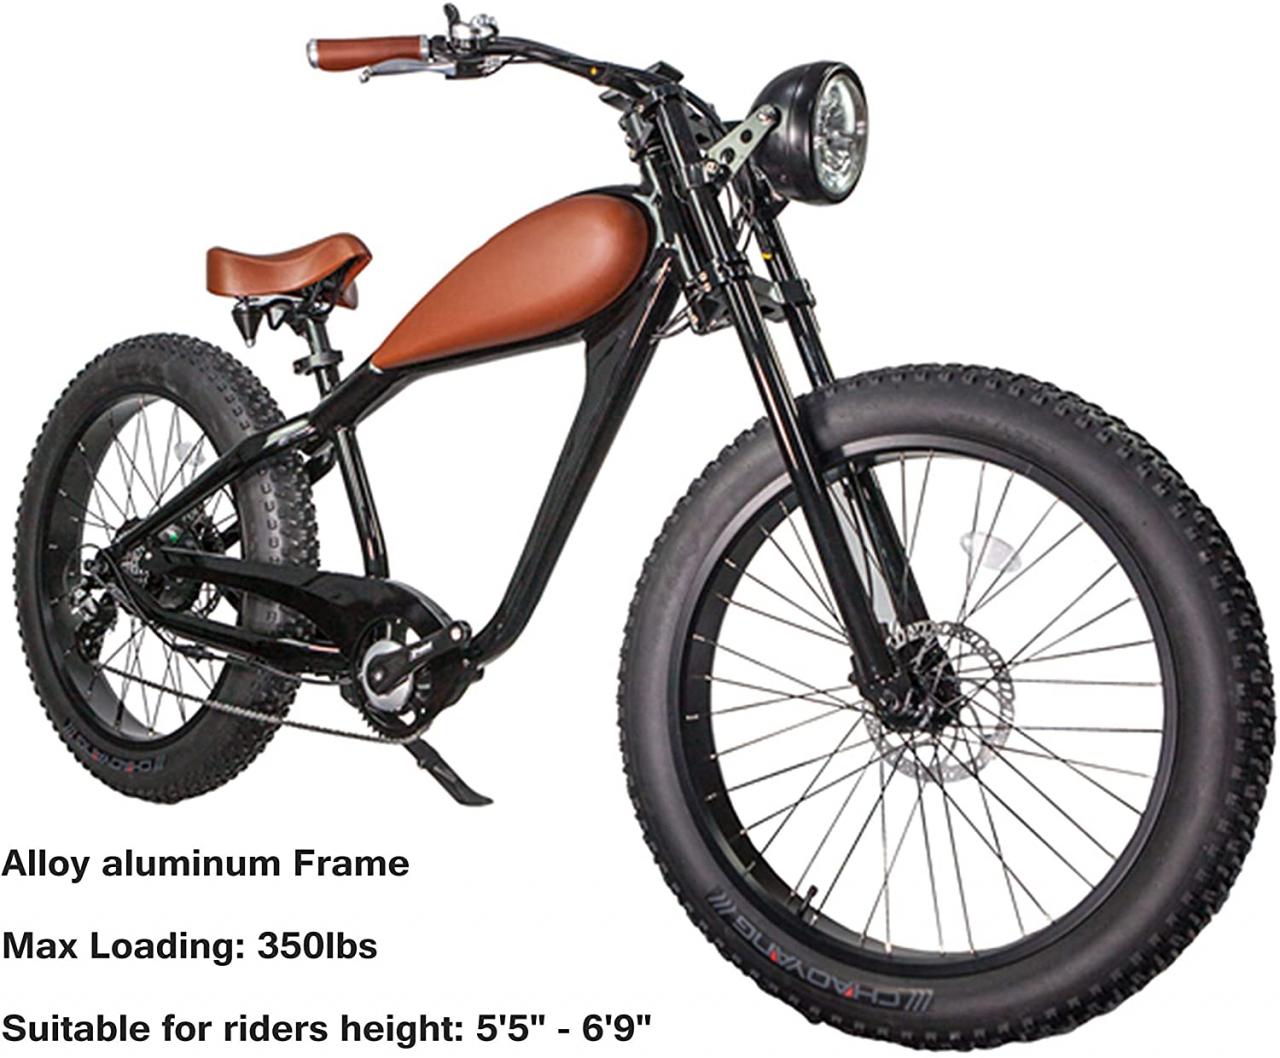 CIVI BIKES Vintage Electric Bike Fat Tire Sport Bicycle 750W café Racer  7-Speed Gear 48V 13AH Battery with Max Speed to 28 MPH - Night Black :  Amazon.co.uk: Sports & Outdoors